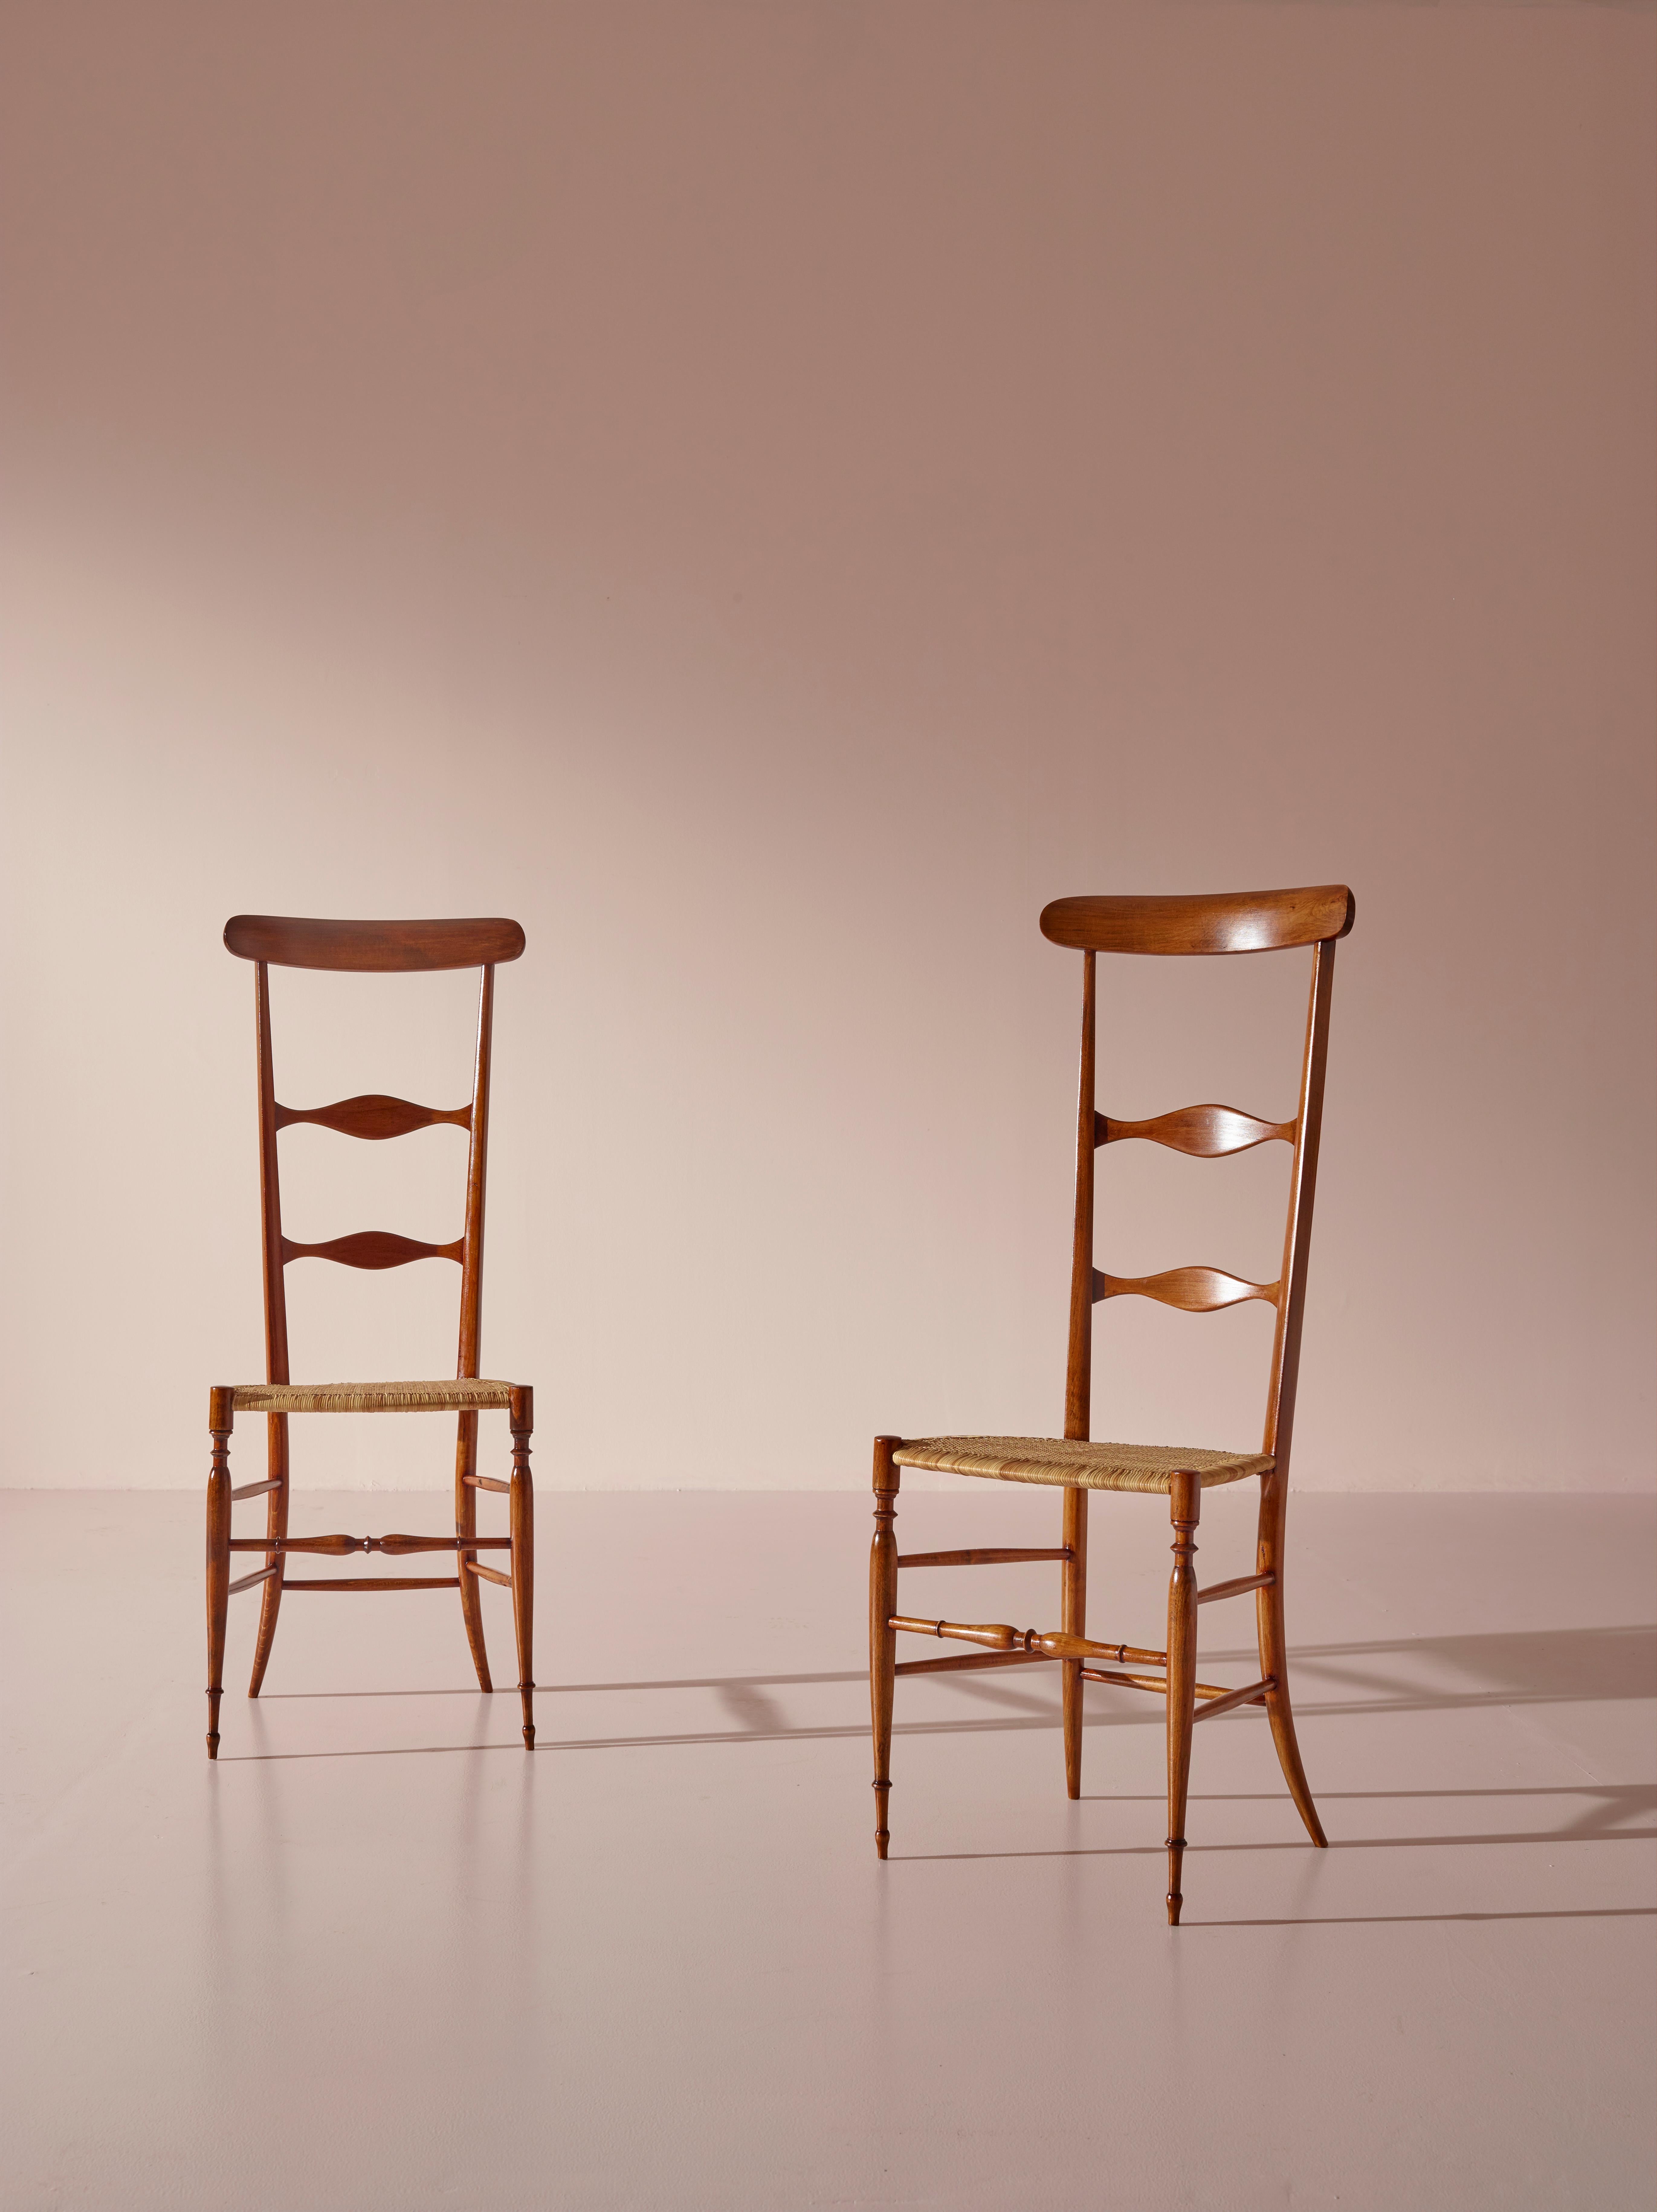 Hand-Knotted Pair of Campanino High Back Chairs Produced by Sabbadini, Chiavari, Italy, 1960s For Sale